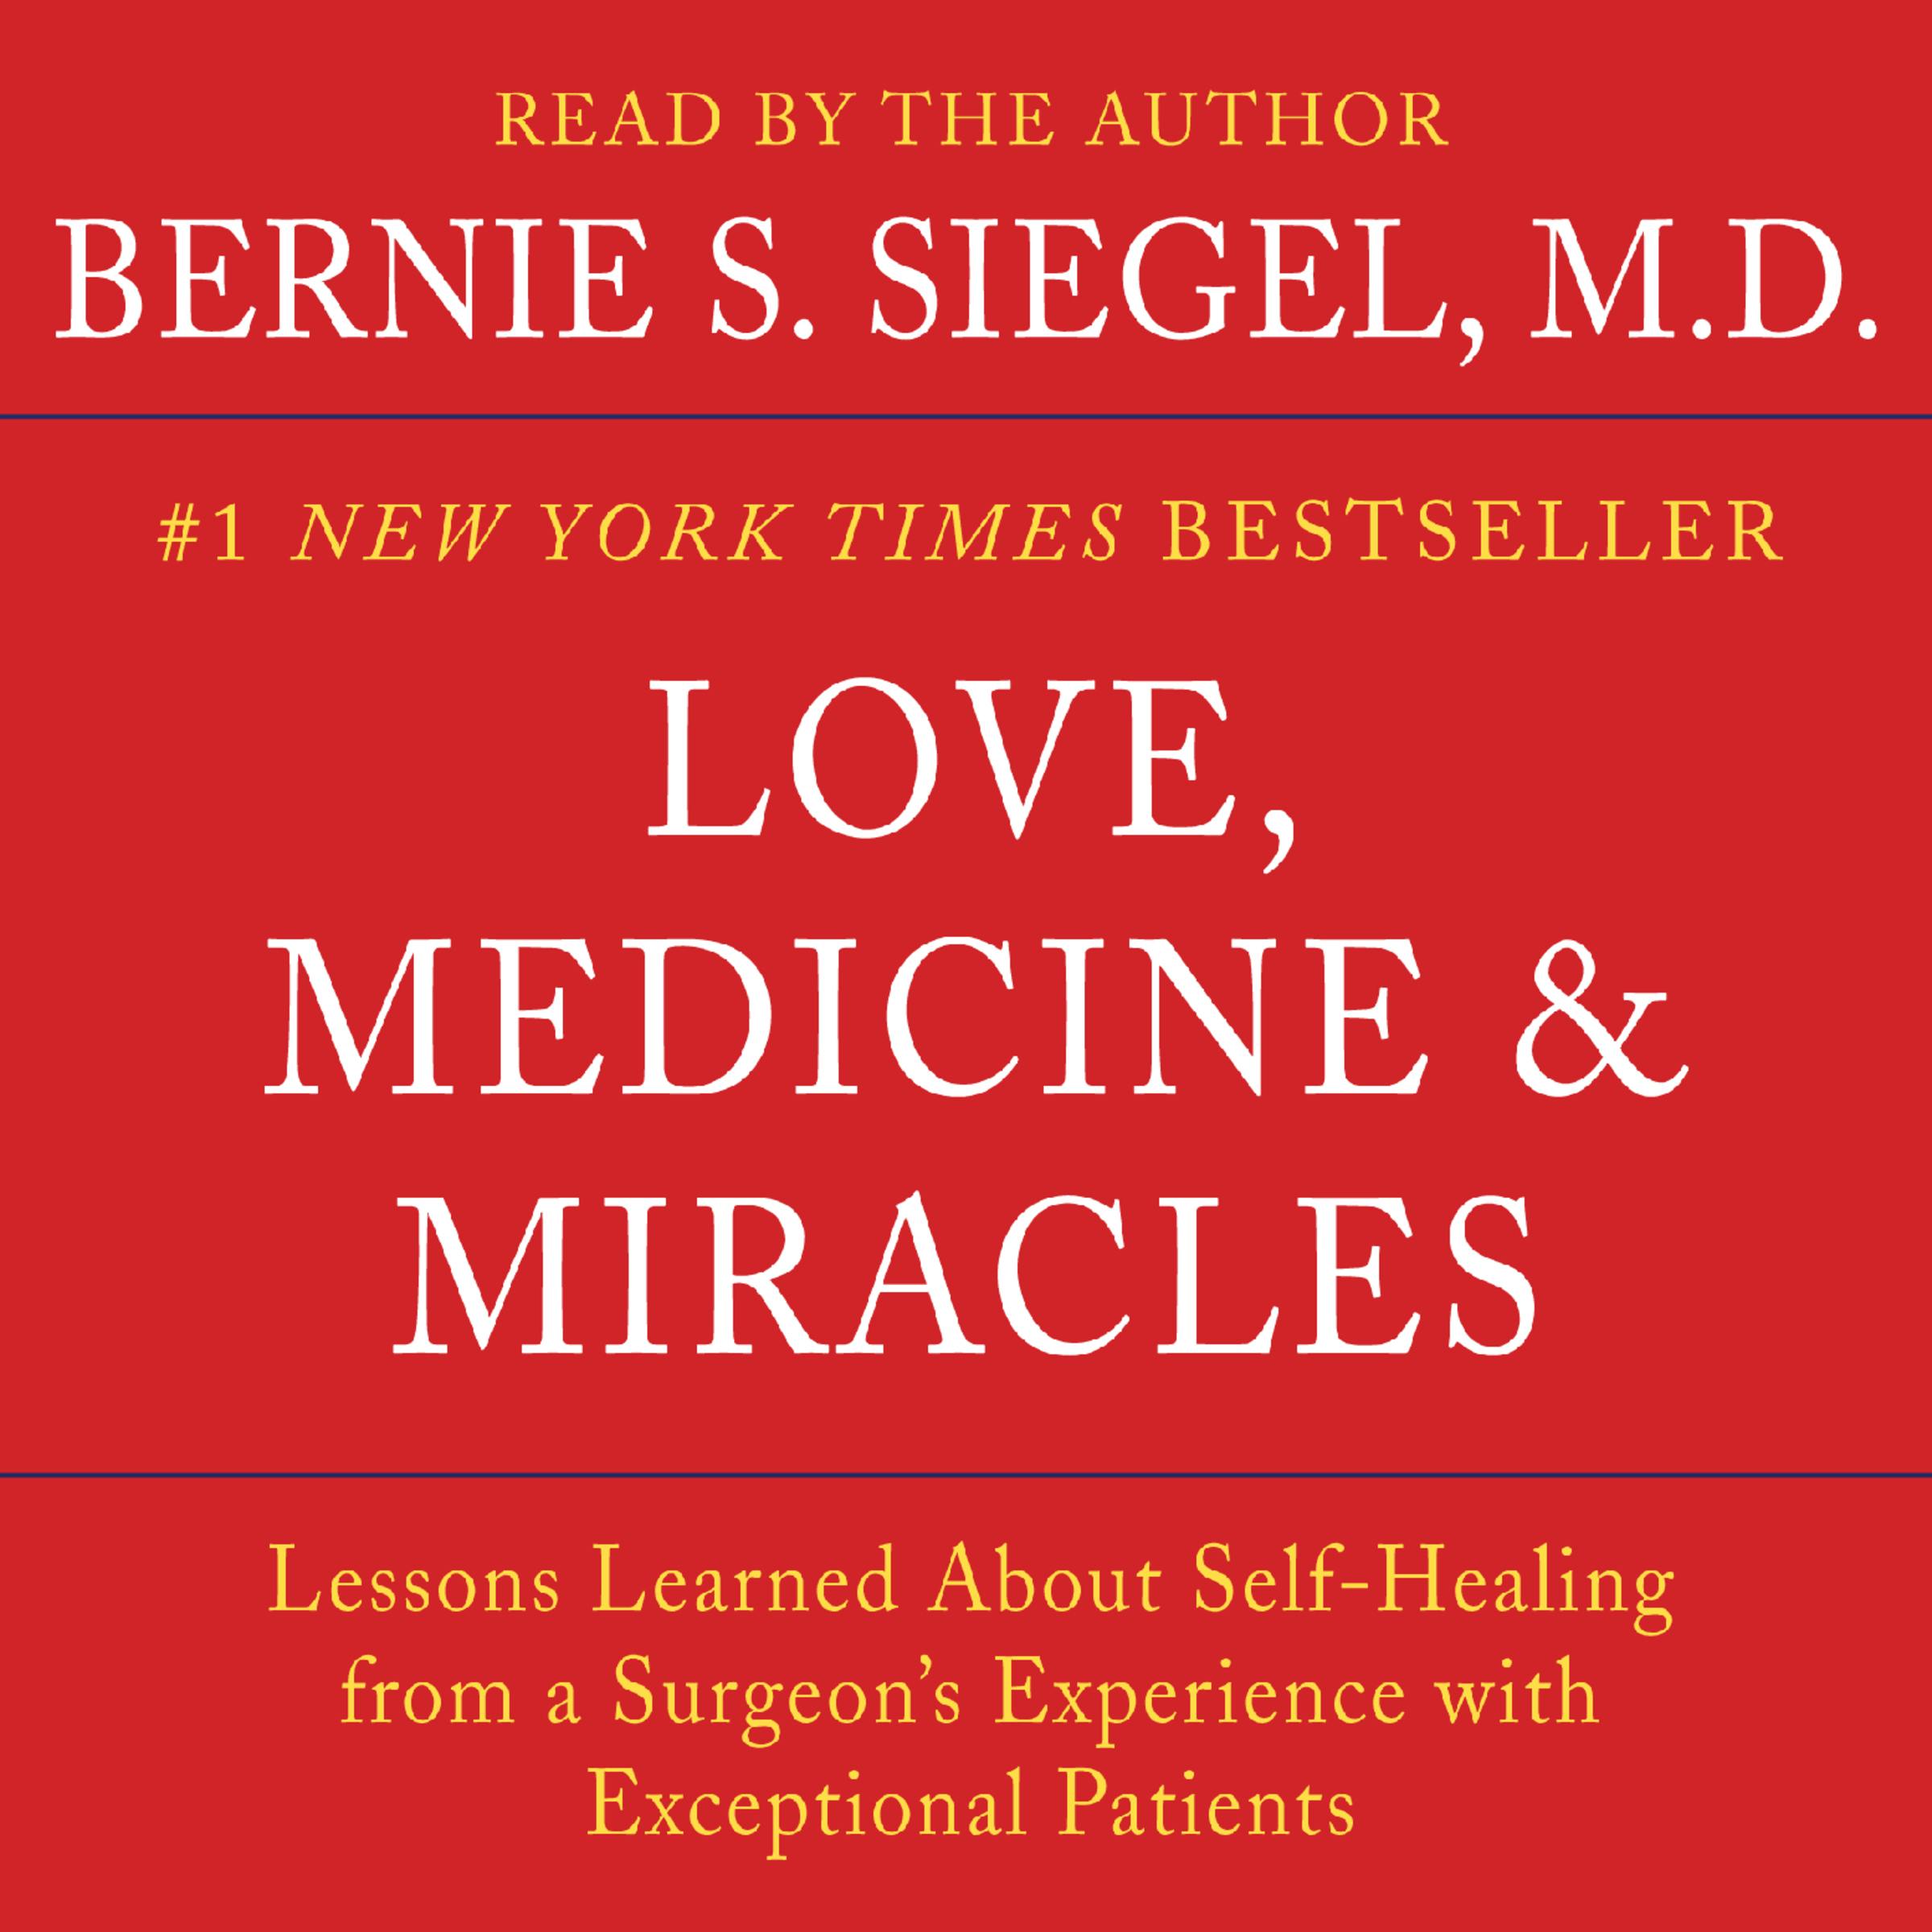 Love, Medicine and Miracles: Lessons Learned about Self-Healing from a Surgeon's Experience with Exceptional Patients - Bernie S. Siegel